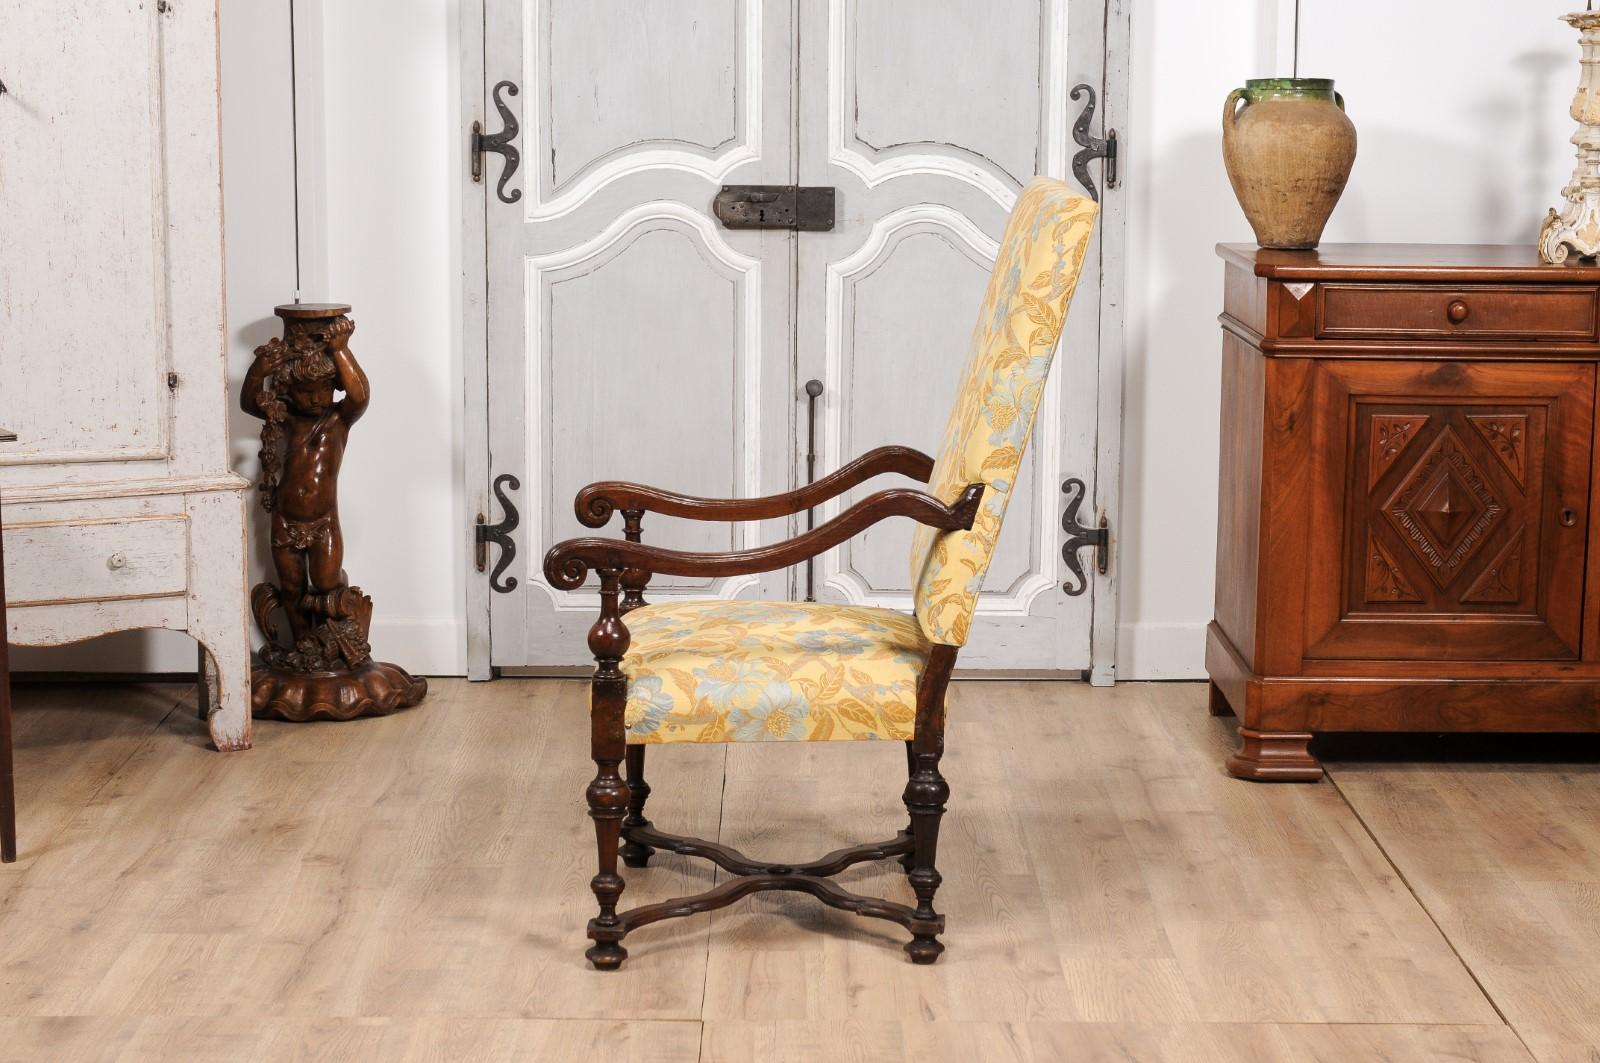 Italian Baroque Period 17th Century Walnut Armchair with Carved X-Form Stretcher For Sale 6